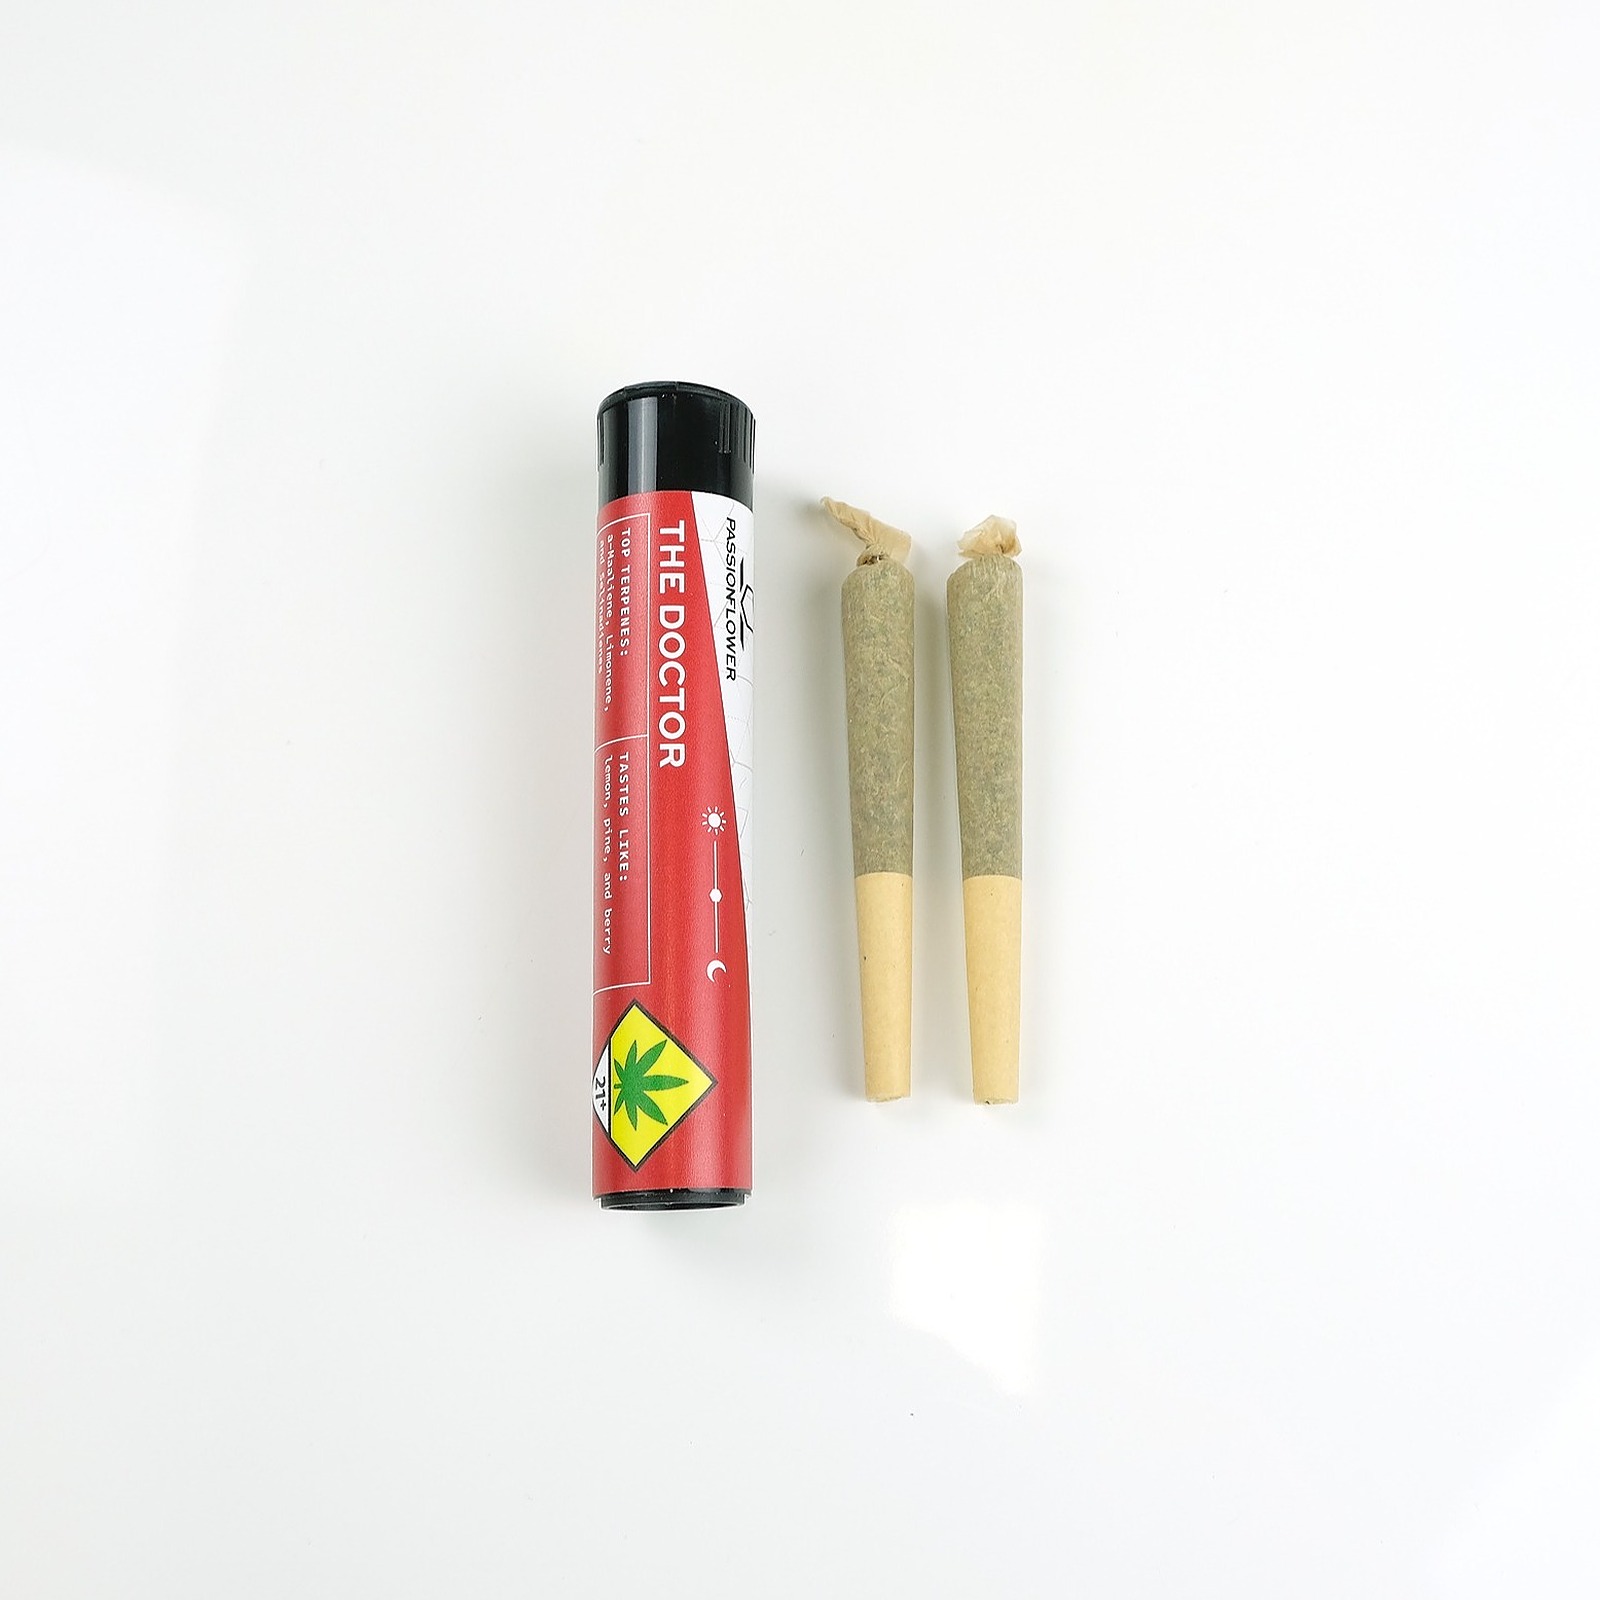 Passion Pre-Roll Pineapple Meatball 2pk